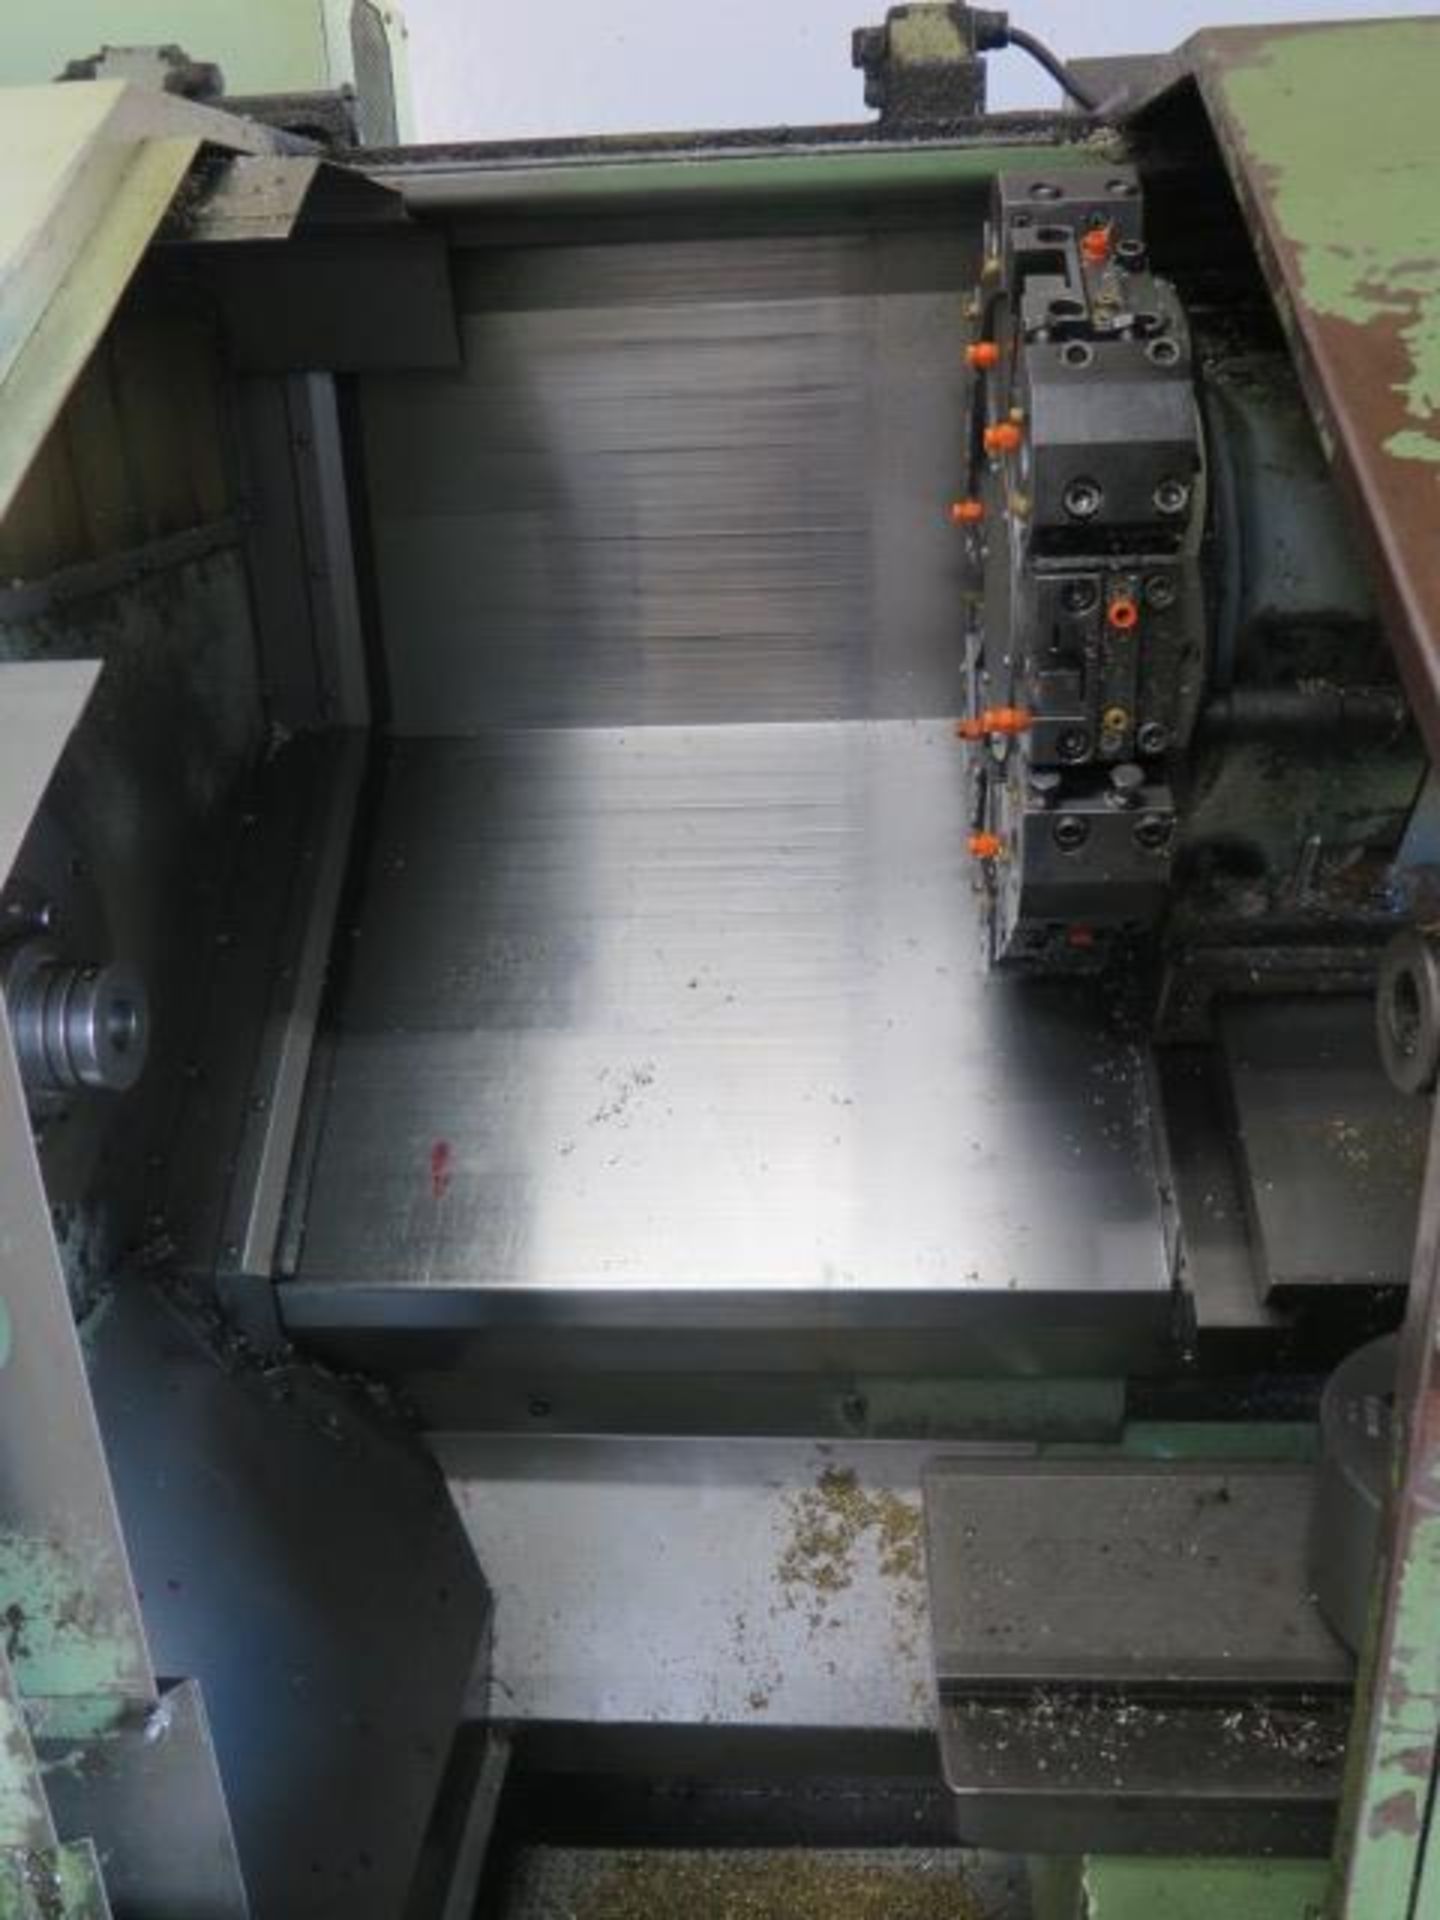 Okuma LB15 CNC Turning Center s/n 9282 w/ OSP5000 L-G Controls, 12-Station Turret, SOLD AS IS - Image 4 of 12